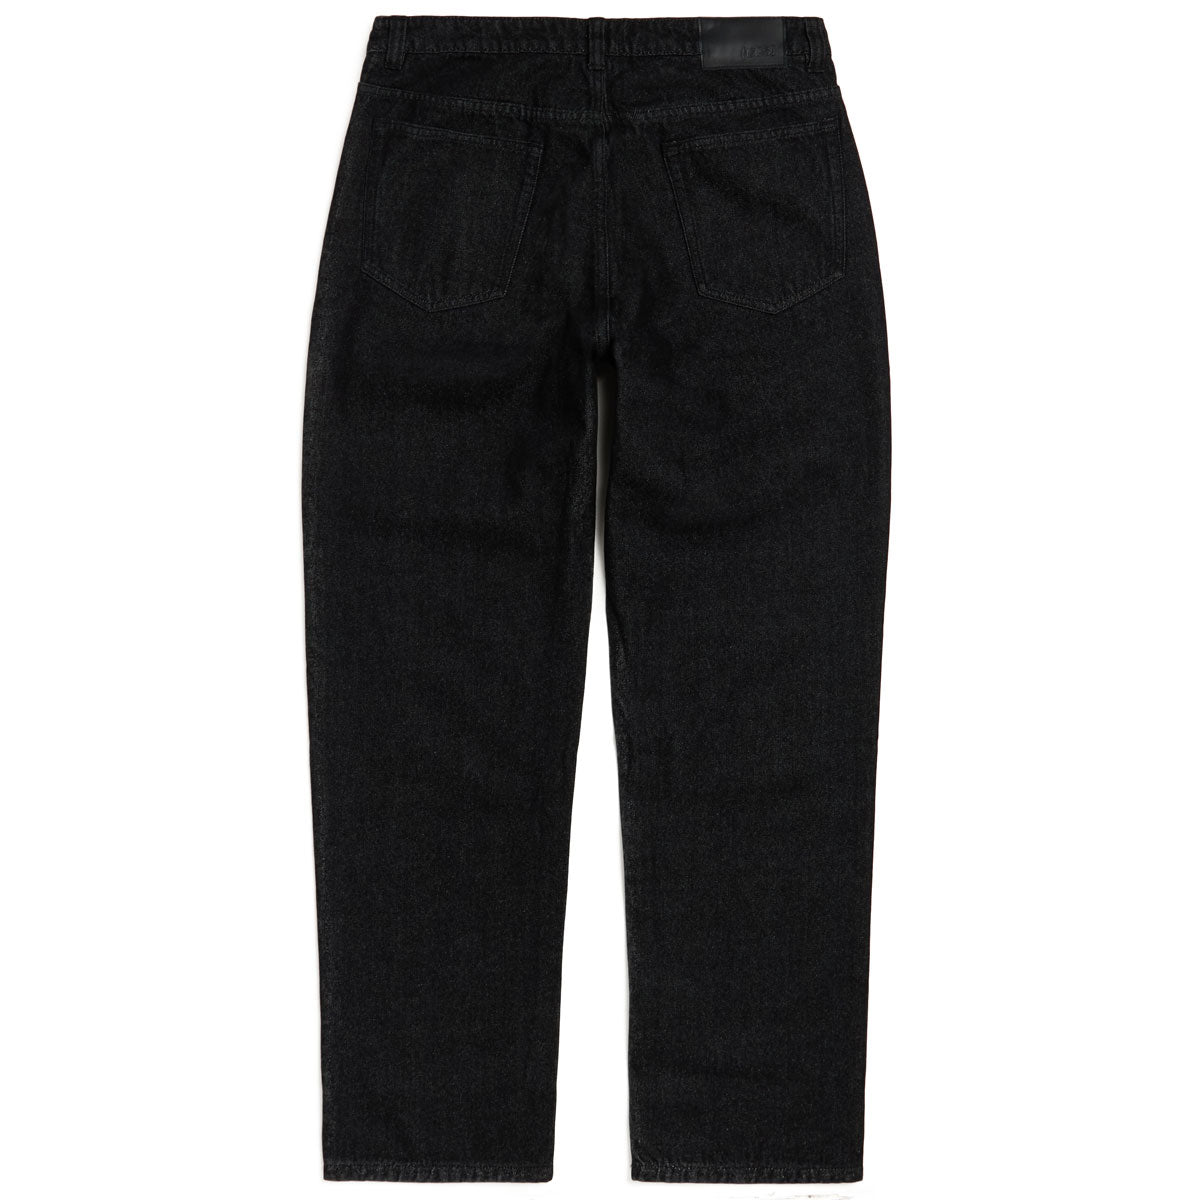 CCS Original Relaxed Taper Jeans - Black image 5